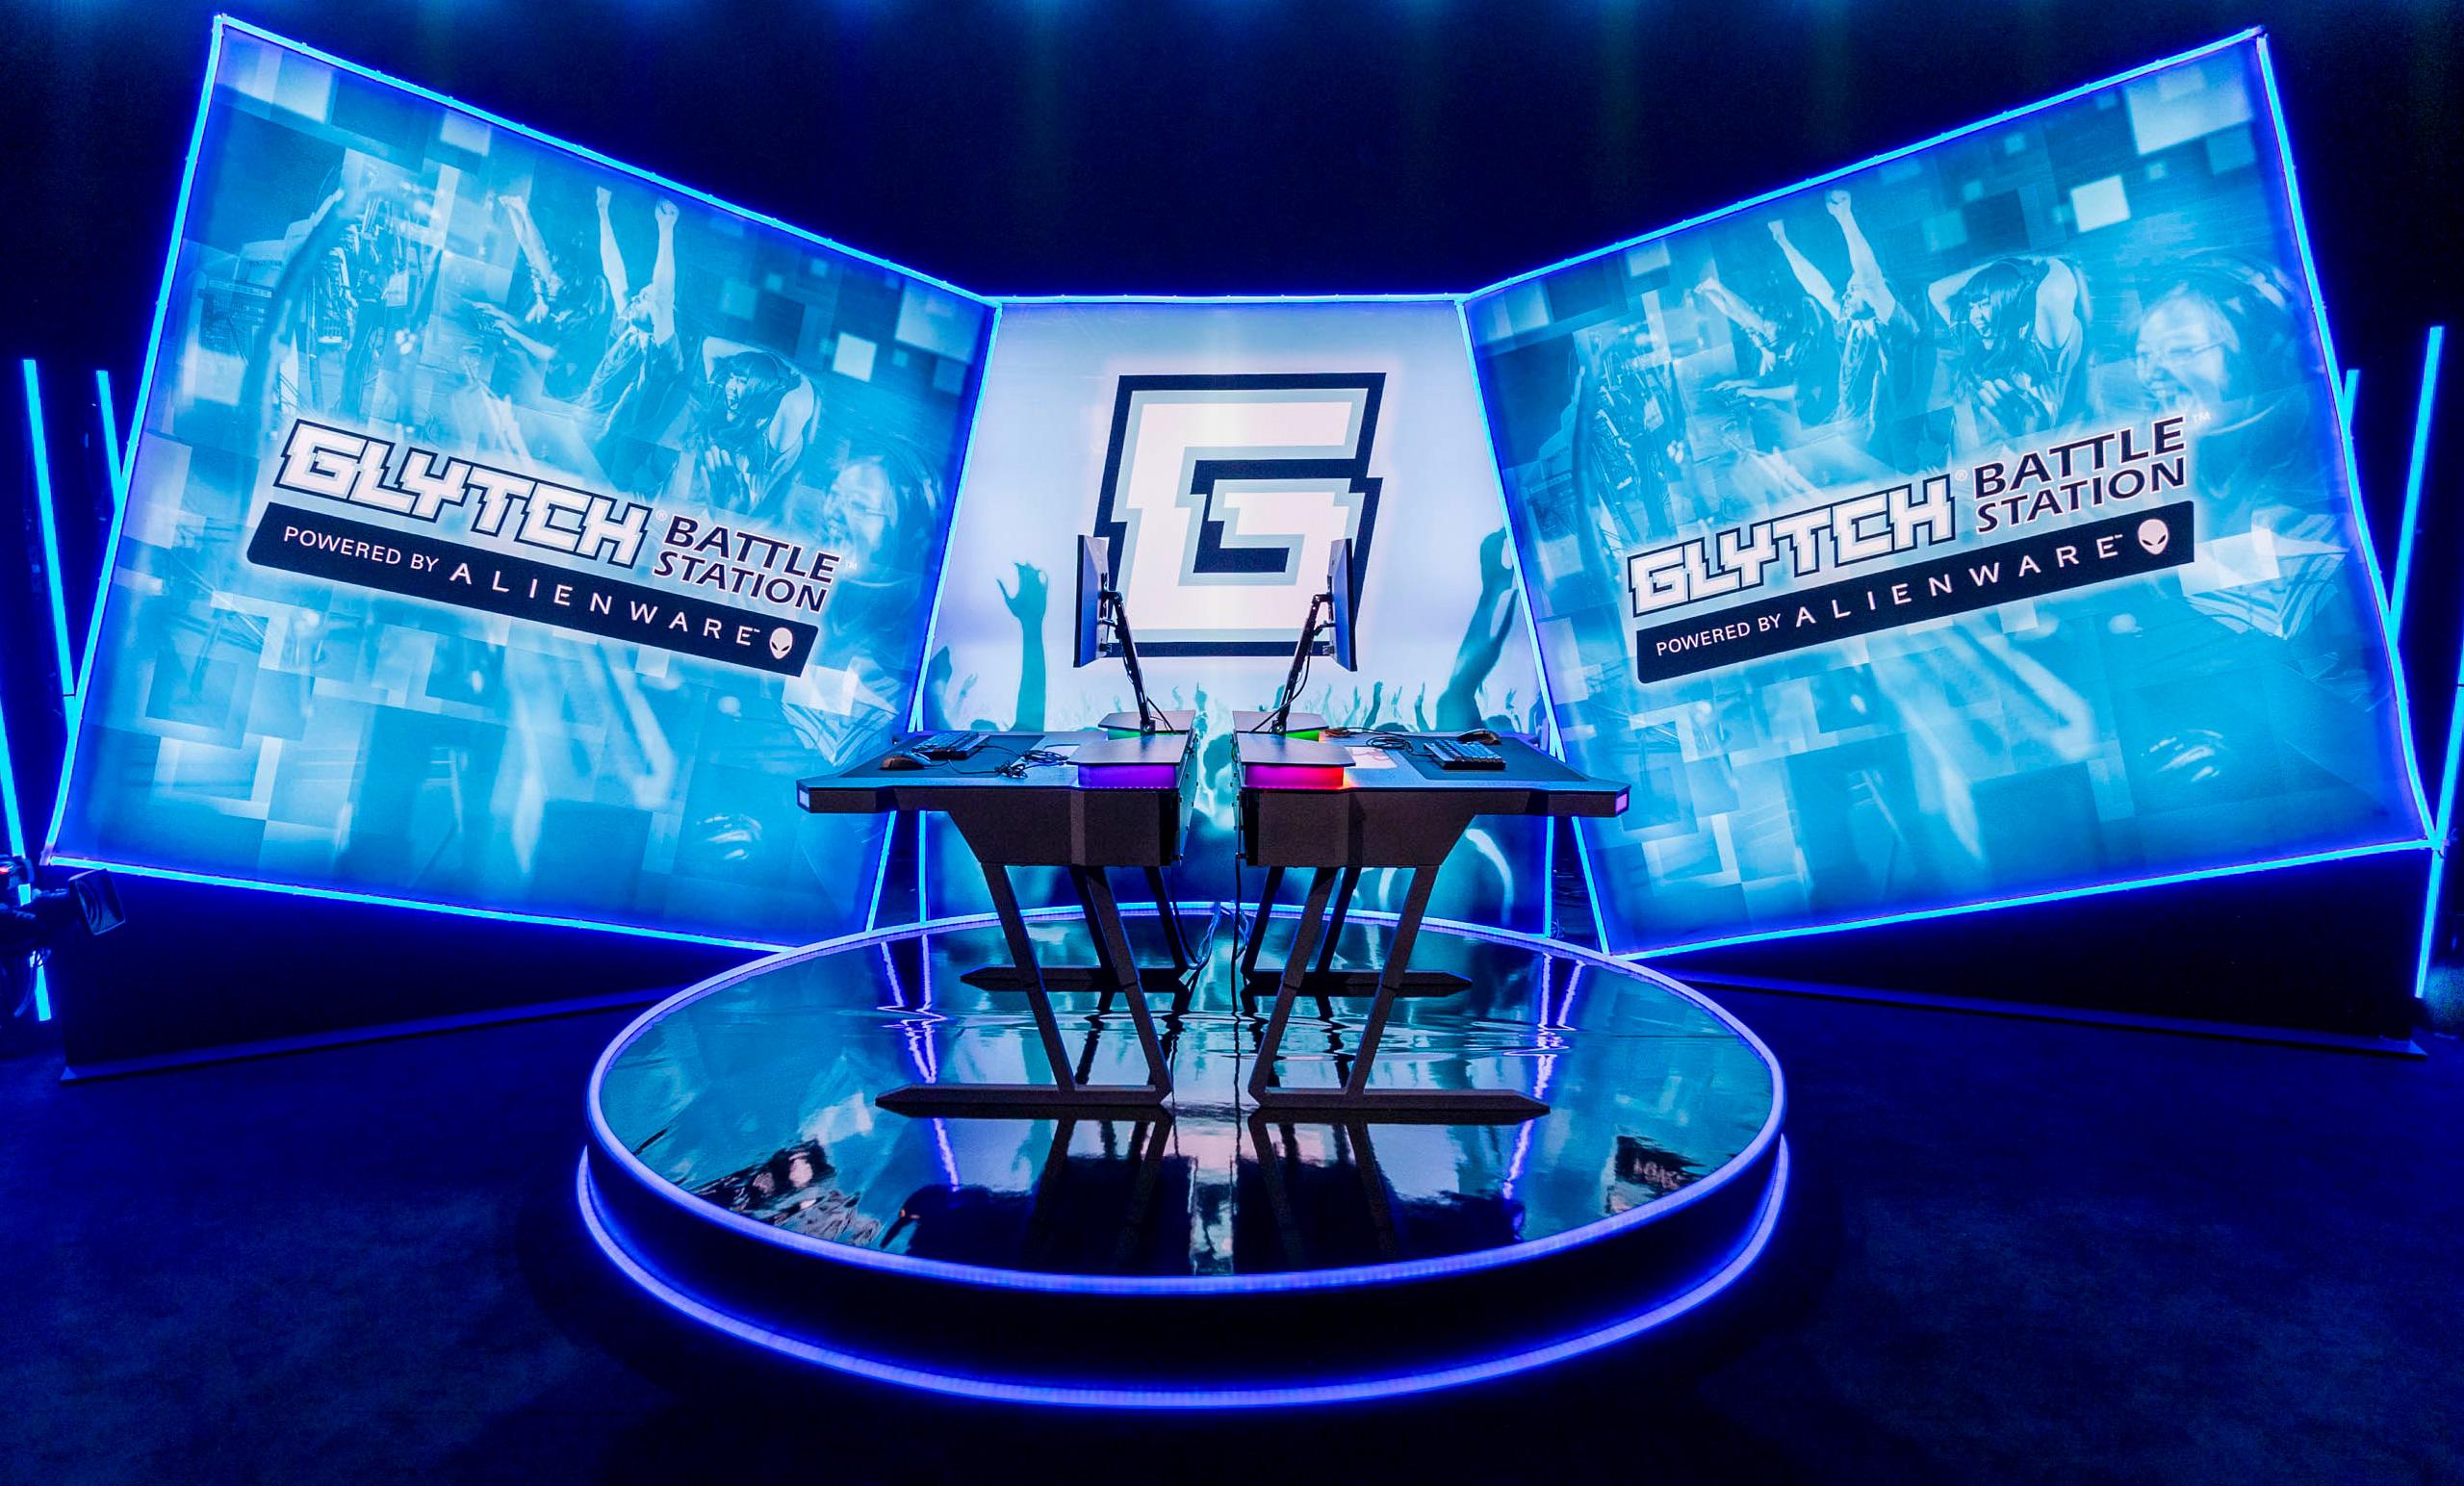 2-Glytch-Battle-Stations-in-Profile-on-Stage